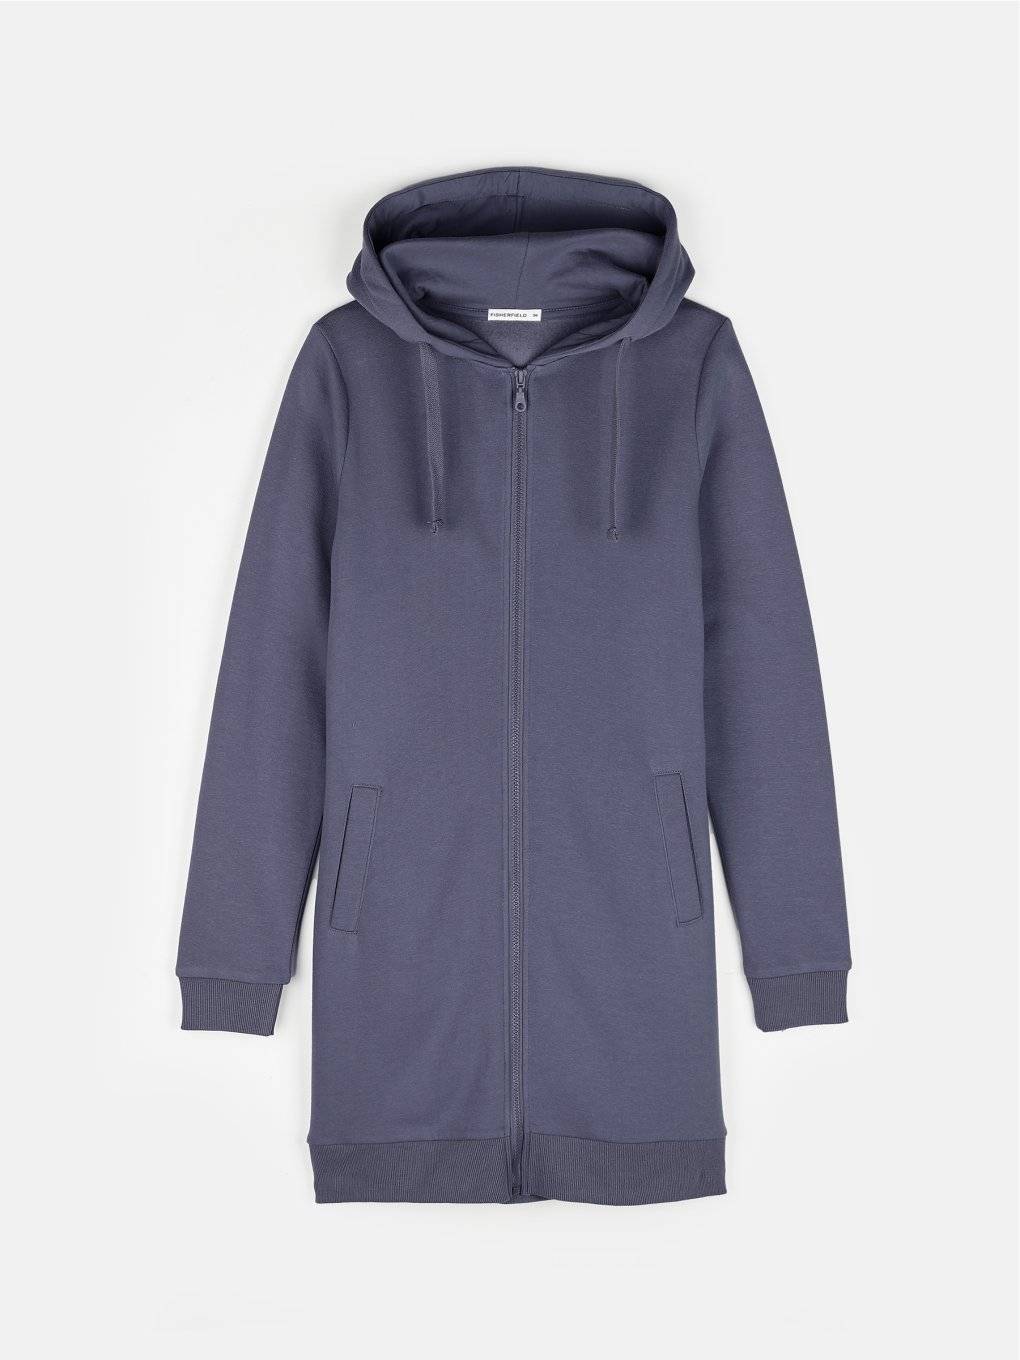 Longline zip-up hoodie with pockets